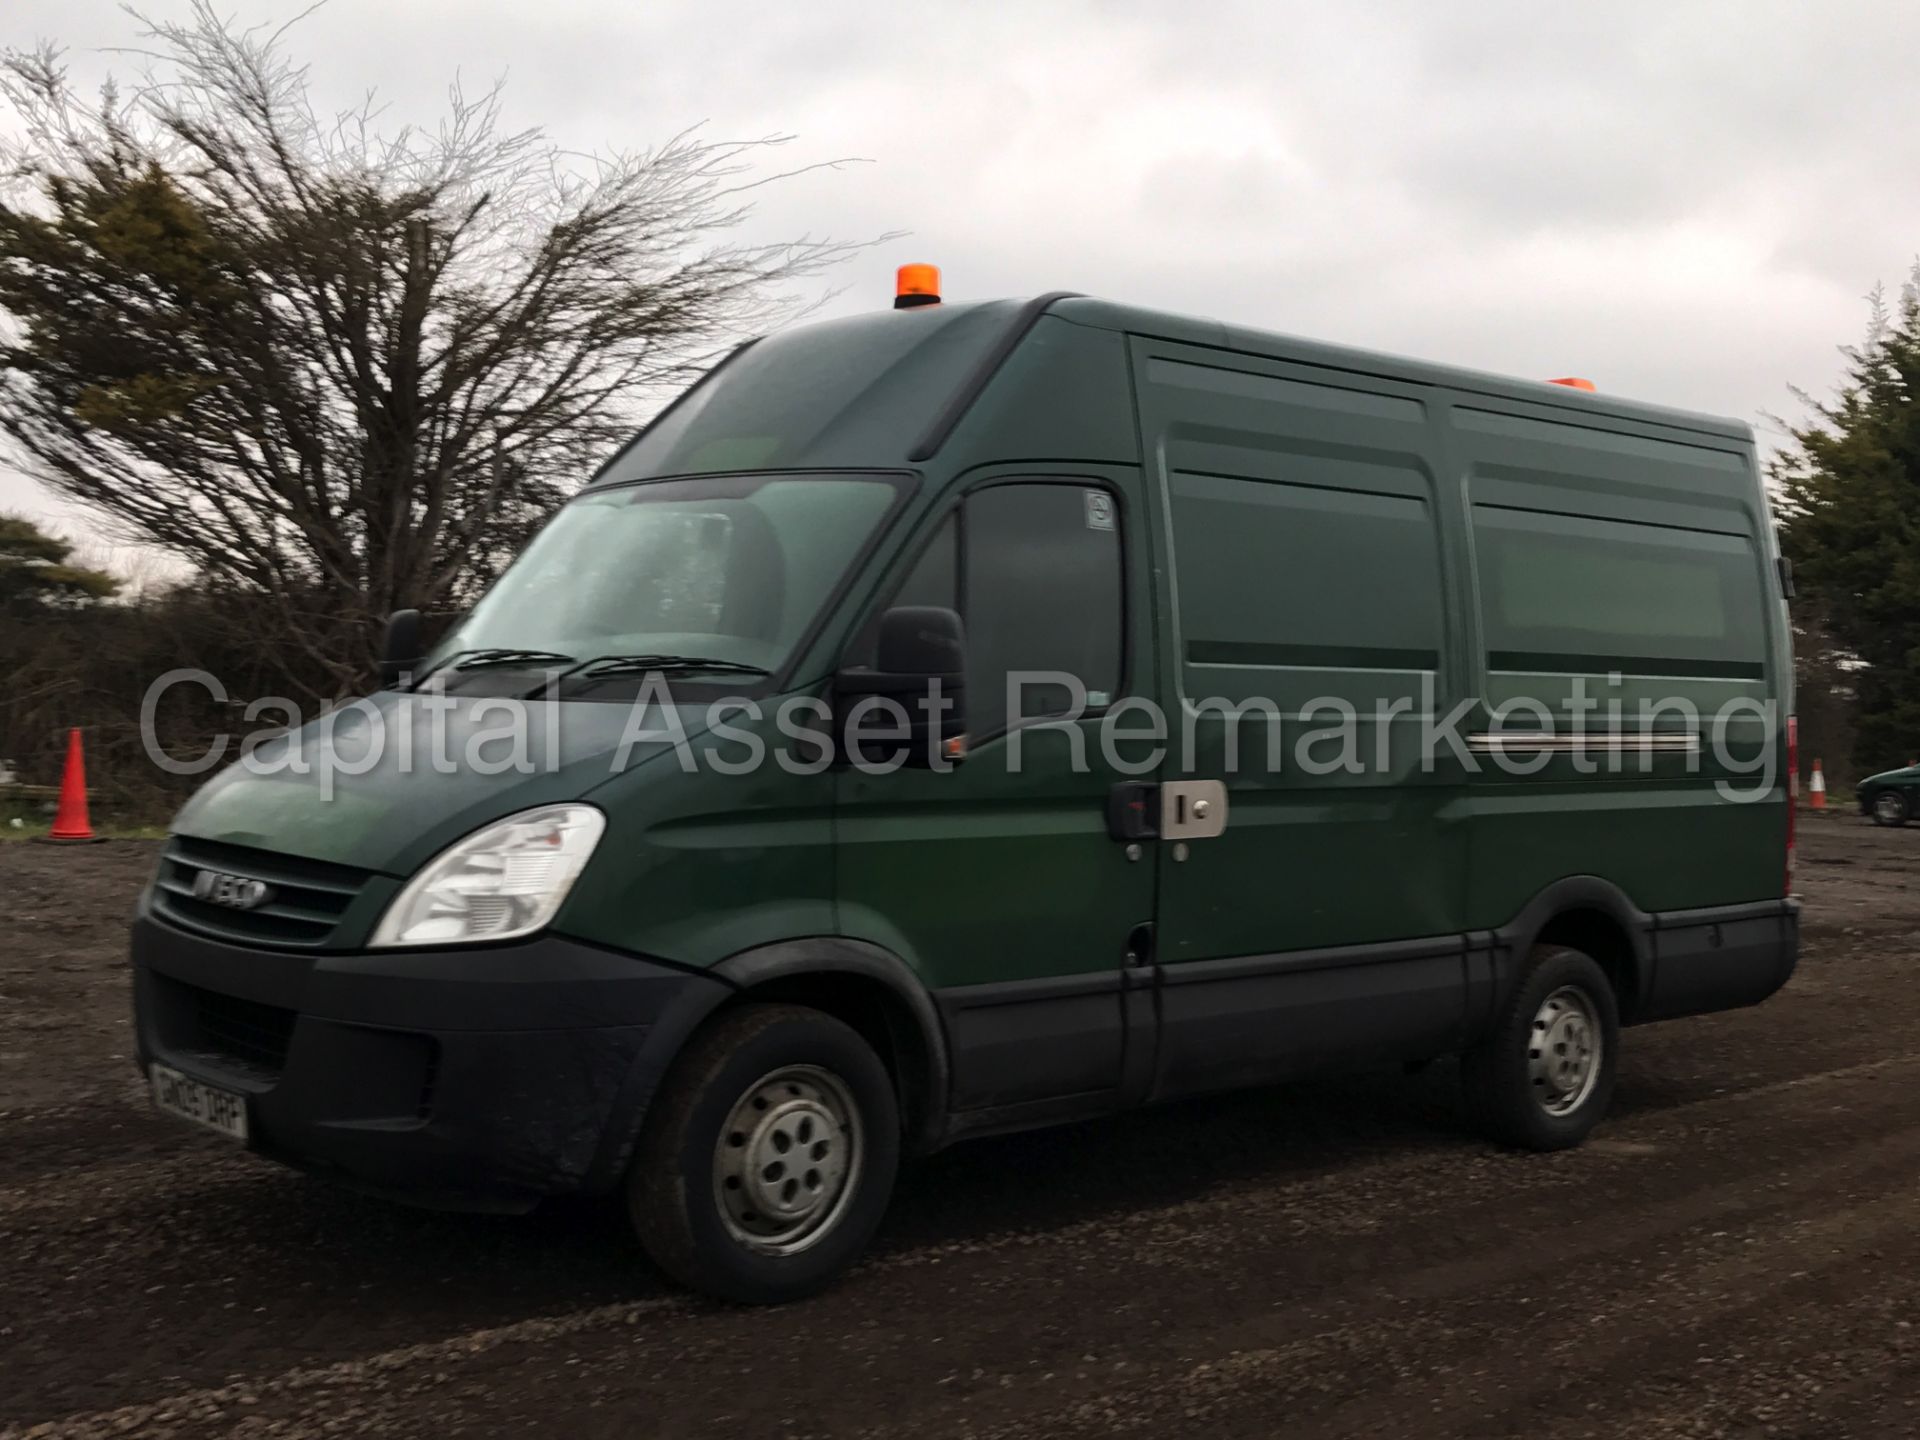 (On Sale) IVECO DAILY 35S12 'MWB HI-ROOF' (2009) '2.3 DIESEL - 120 BHP - 5 SPEED' (1 COMPANY OWNER) - Image 4 of 15